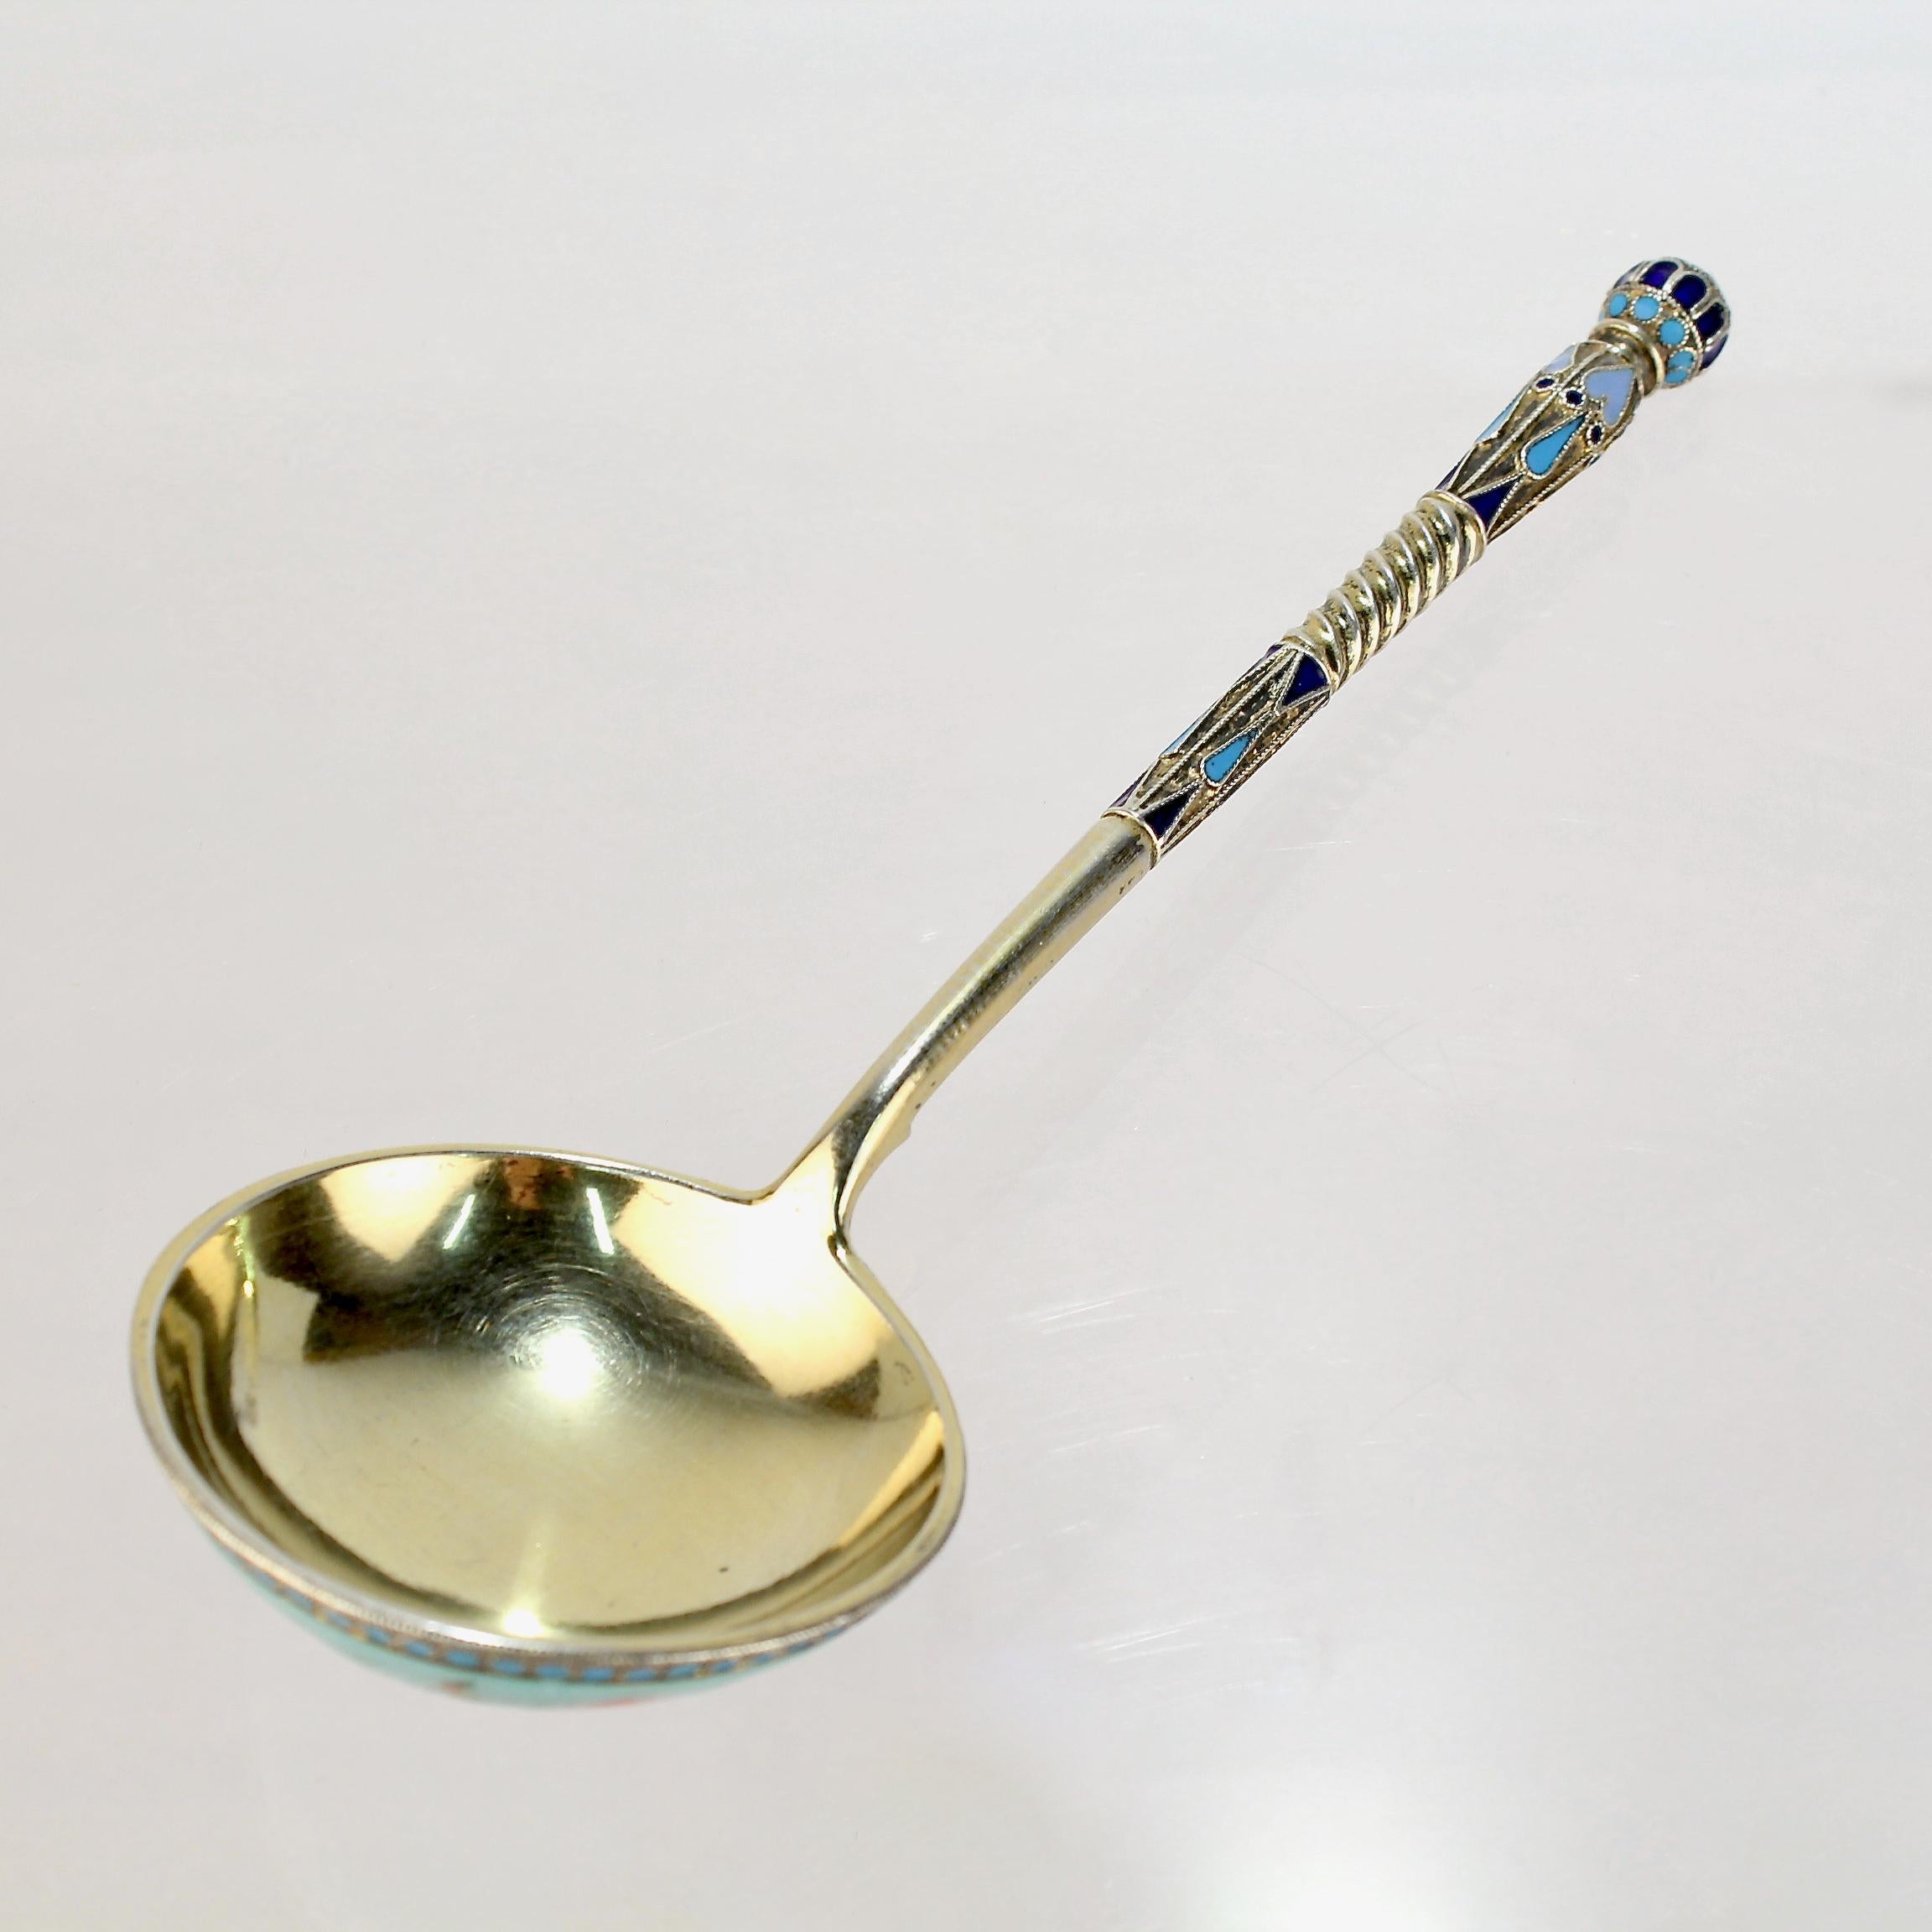 Russian Empire Imperial Russian Silver Cloisonné & Pictorial Enamel Spoon by Ivan Saltykov